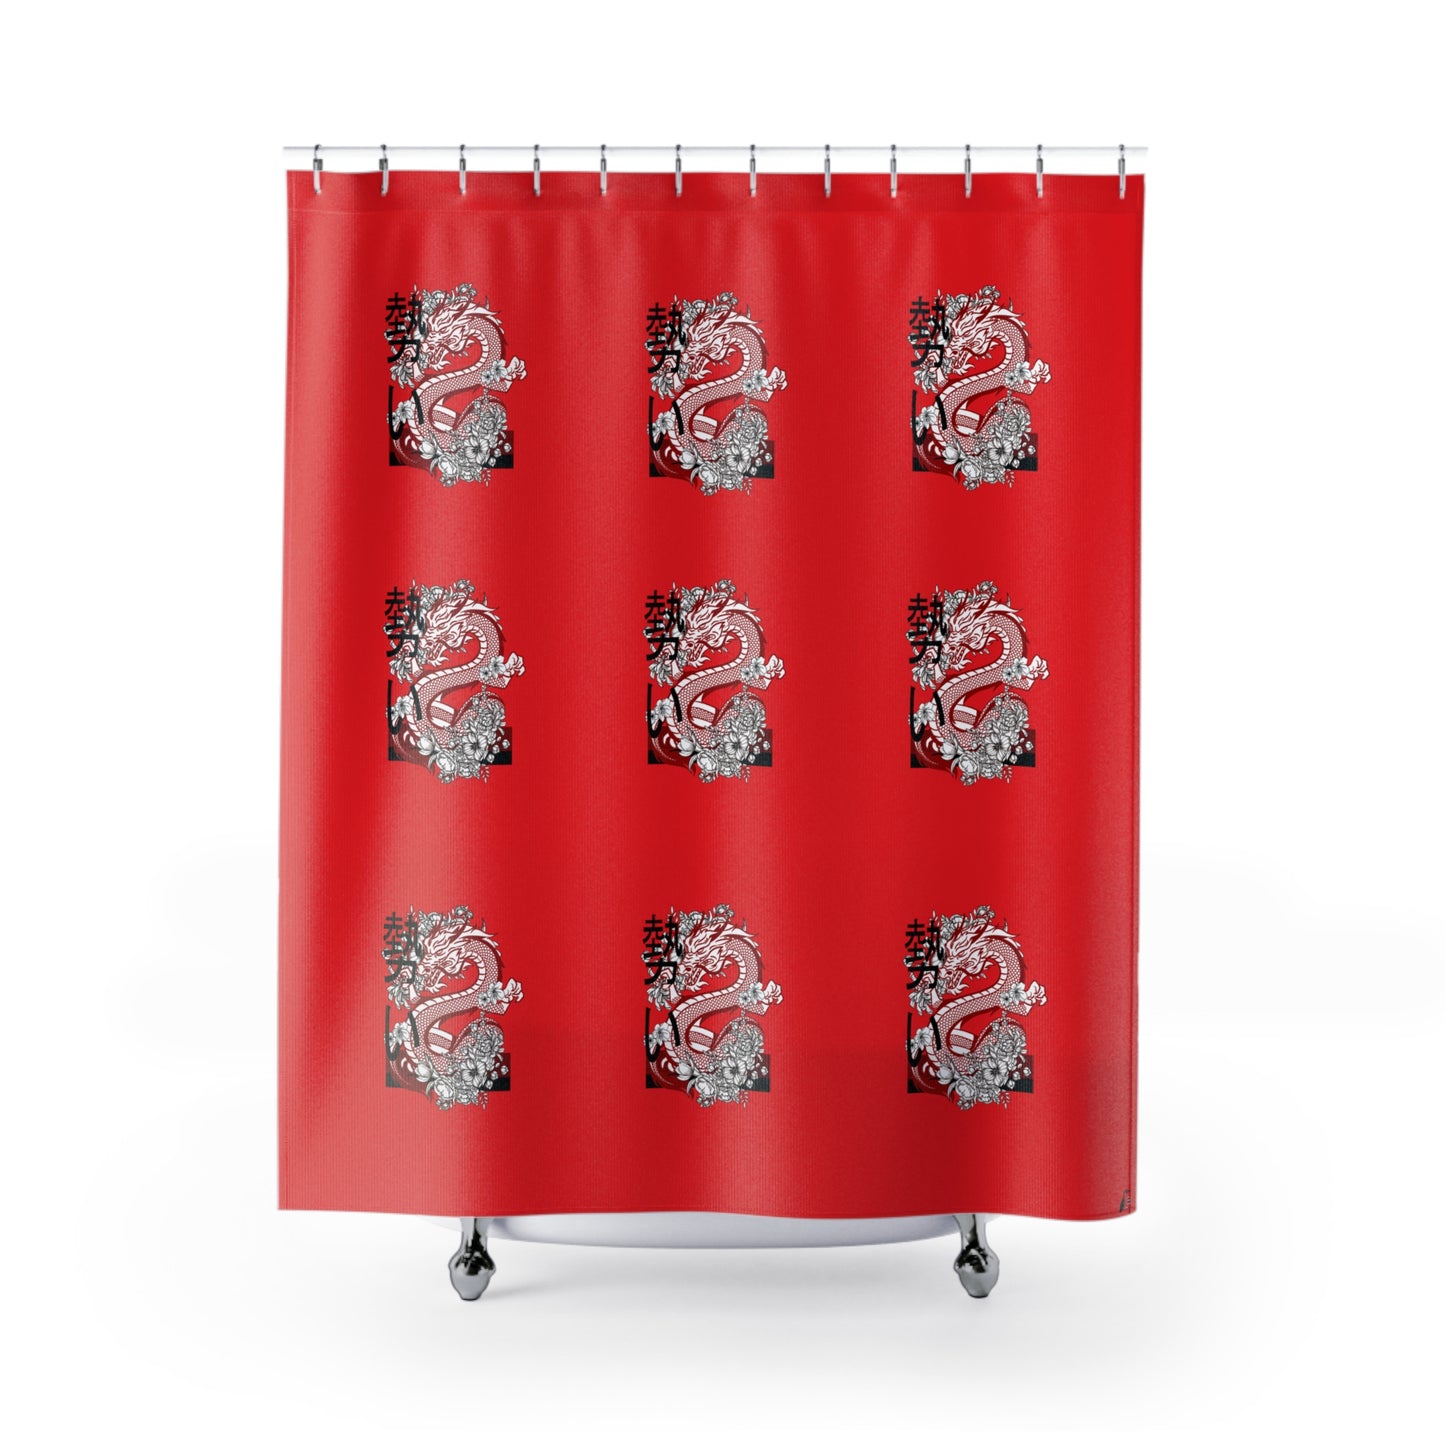 Shower Curtains: #2 Dragons Red